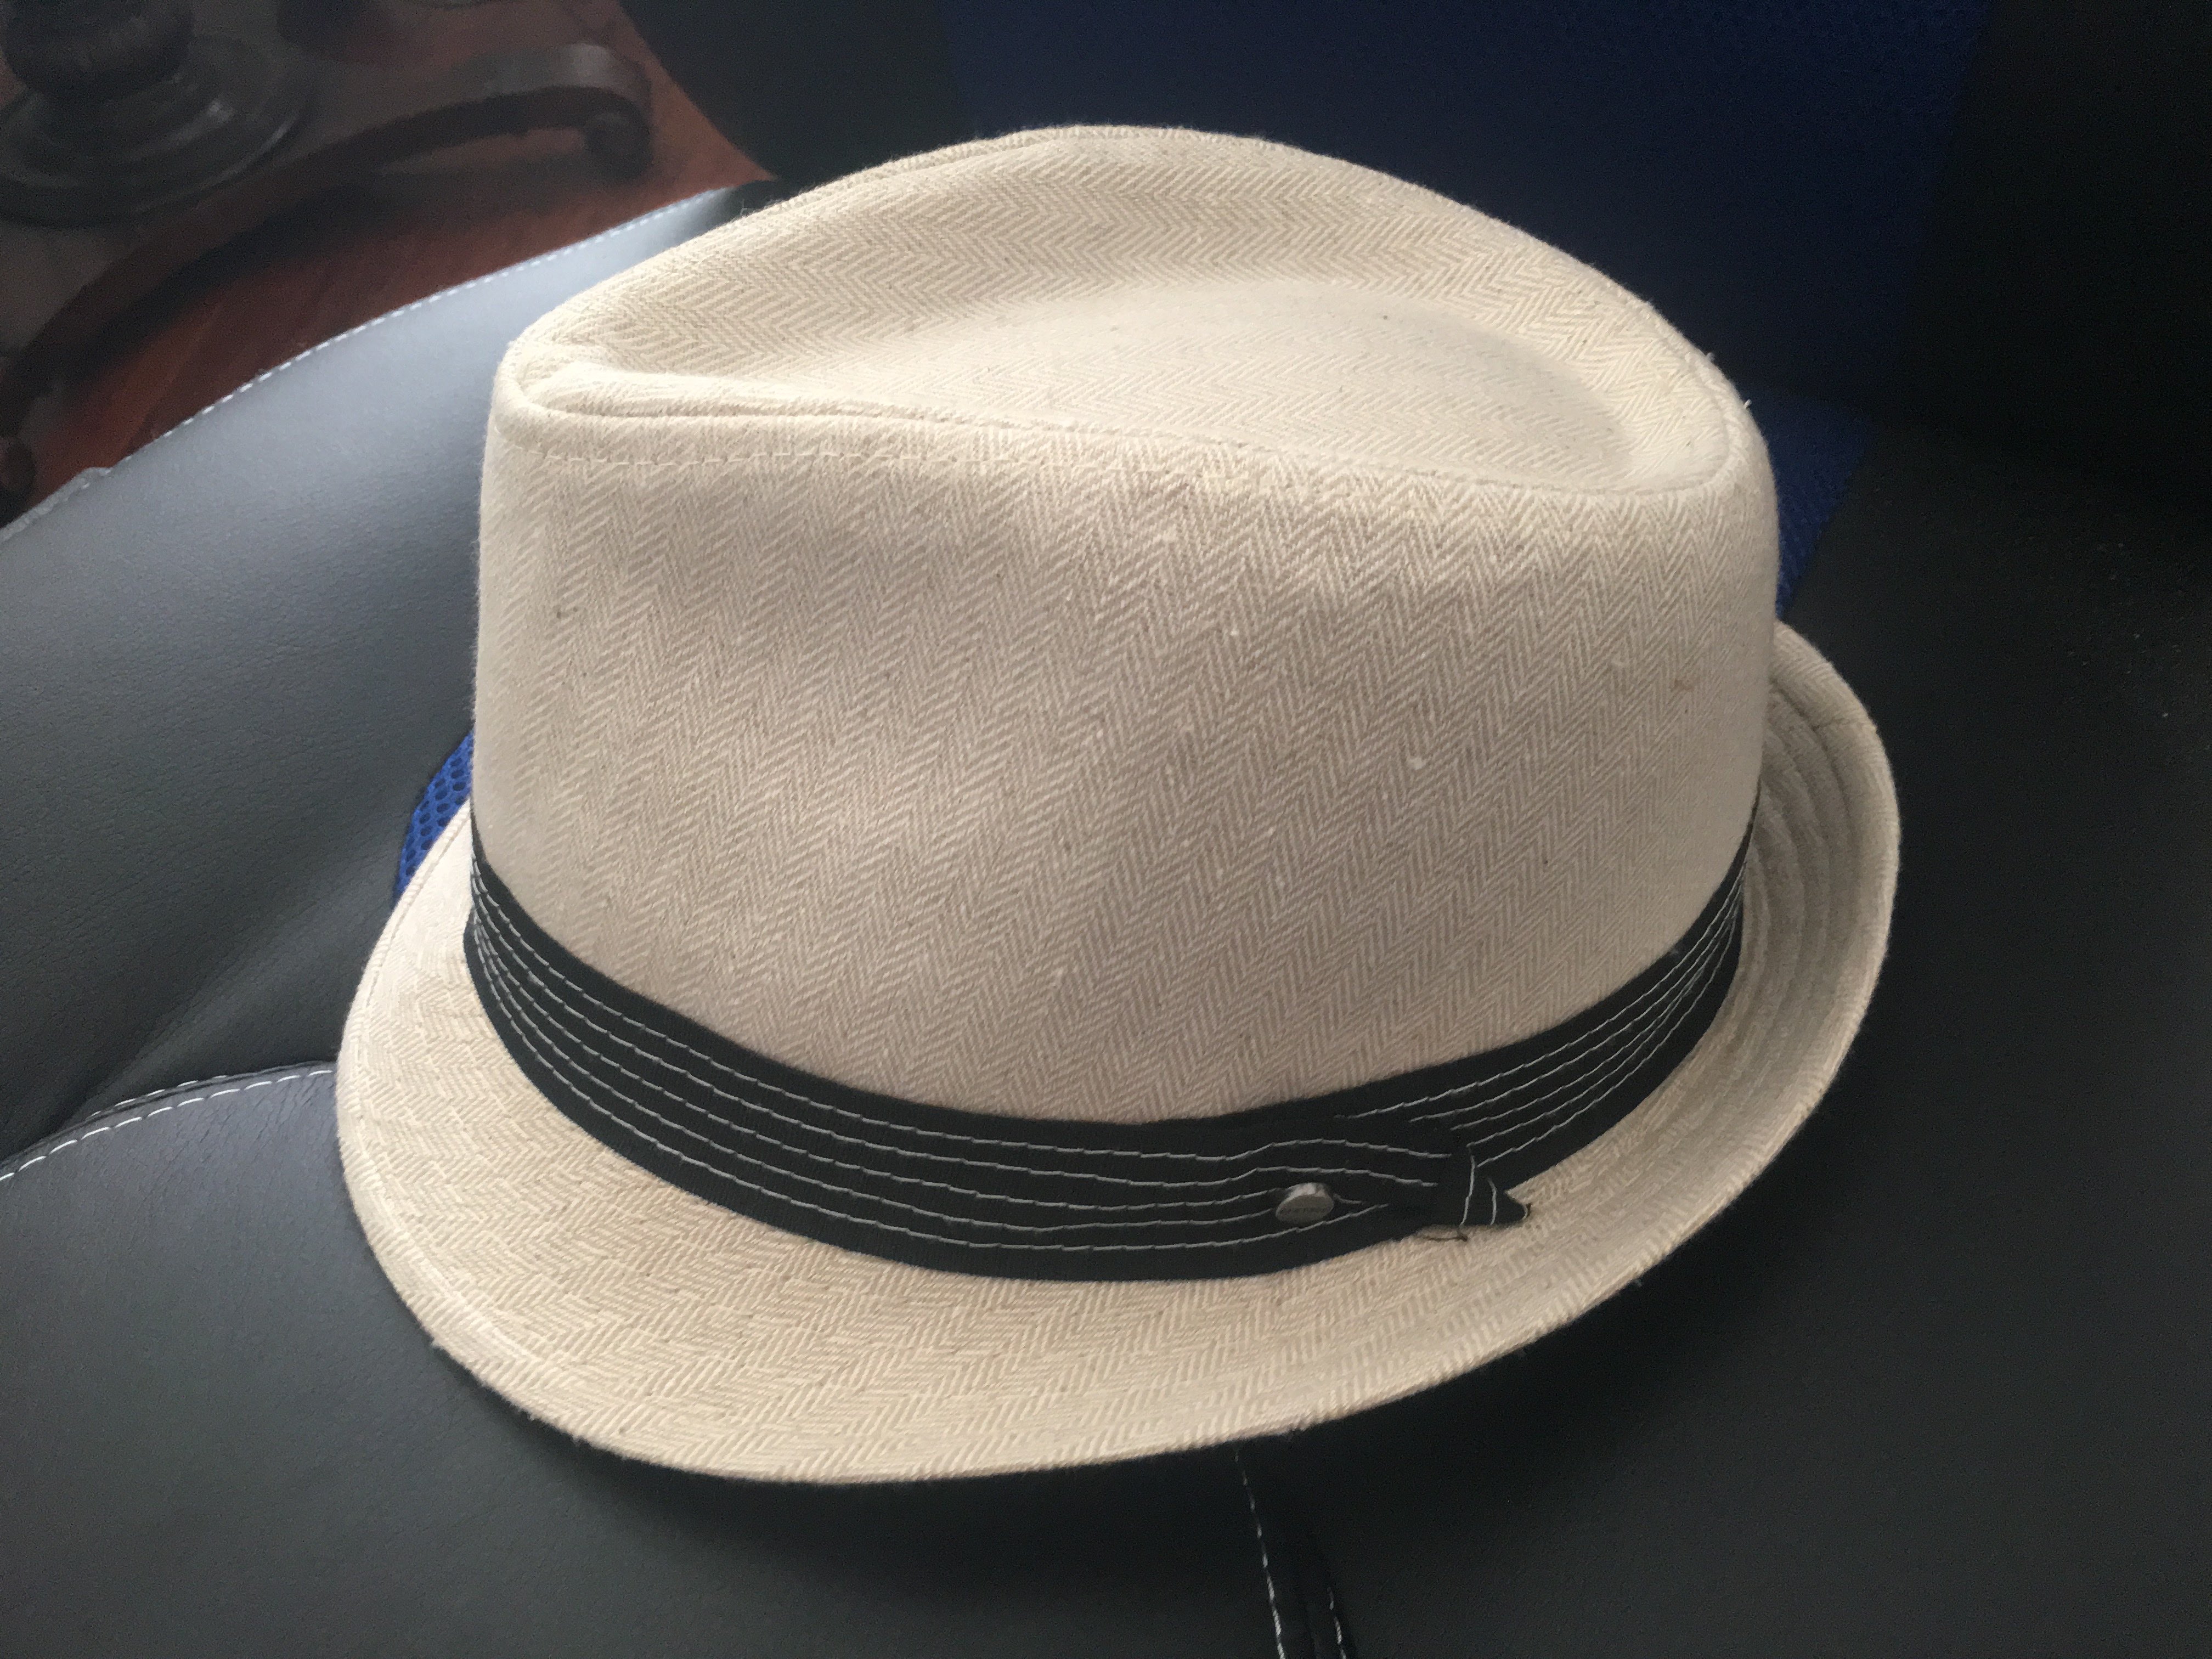 Post New Hats Here! | Page 1826 | The Fedora Lounge